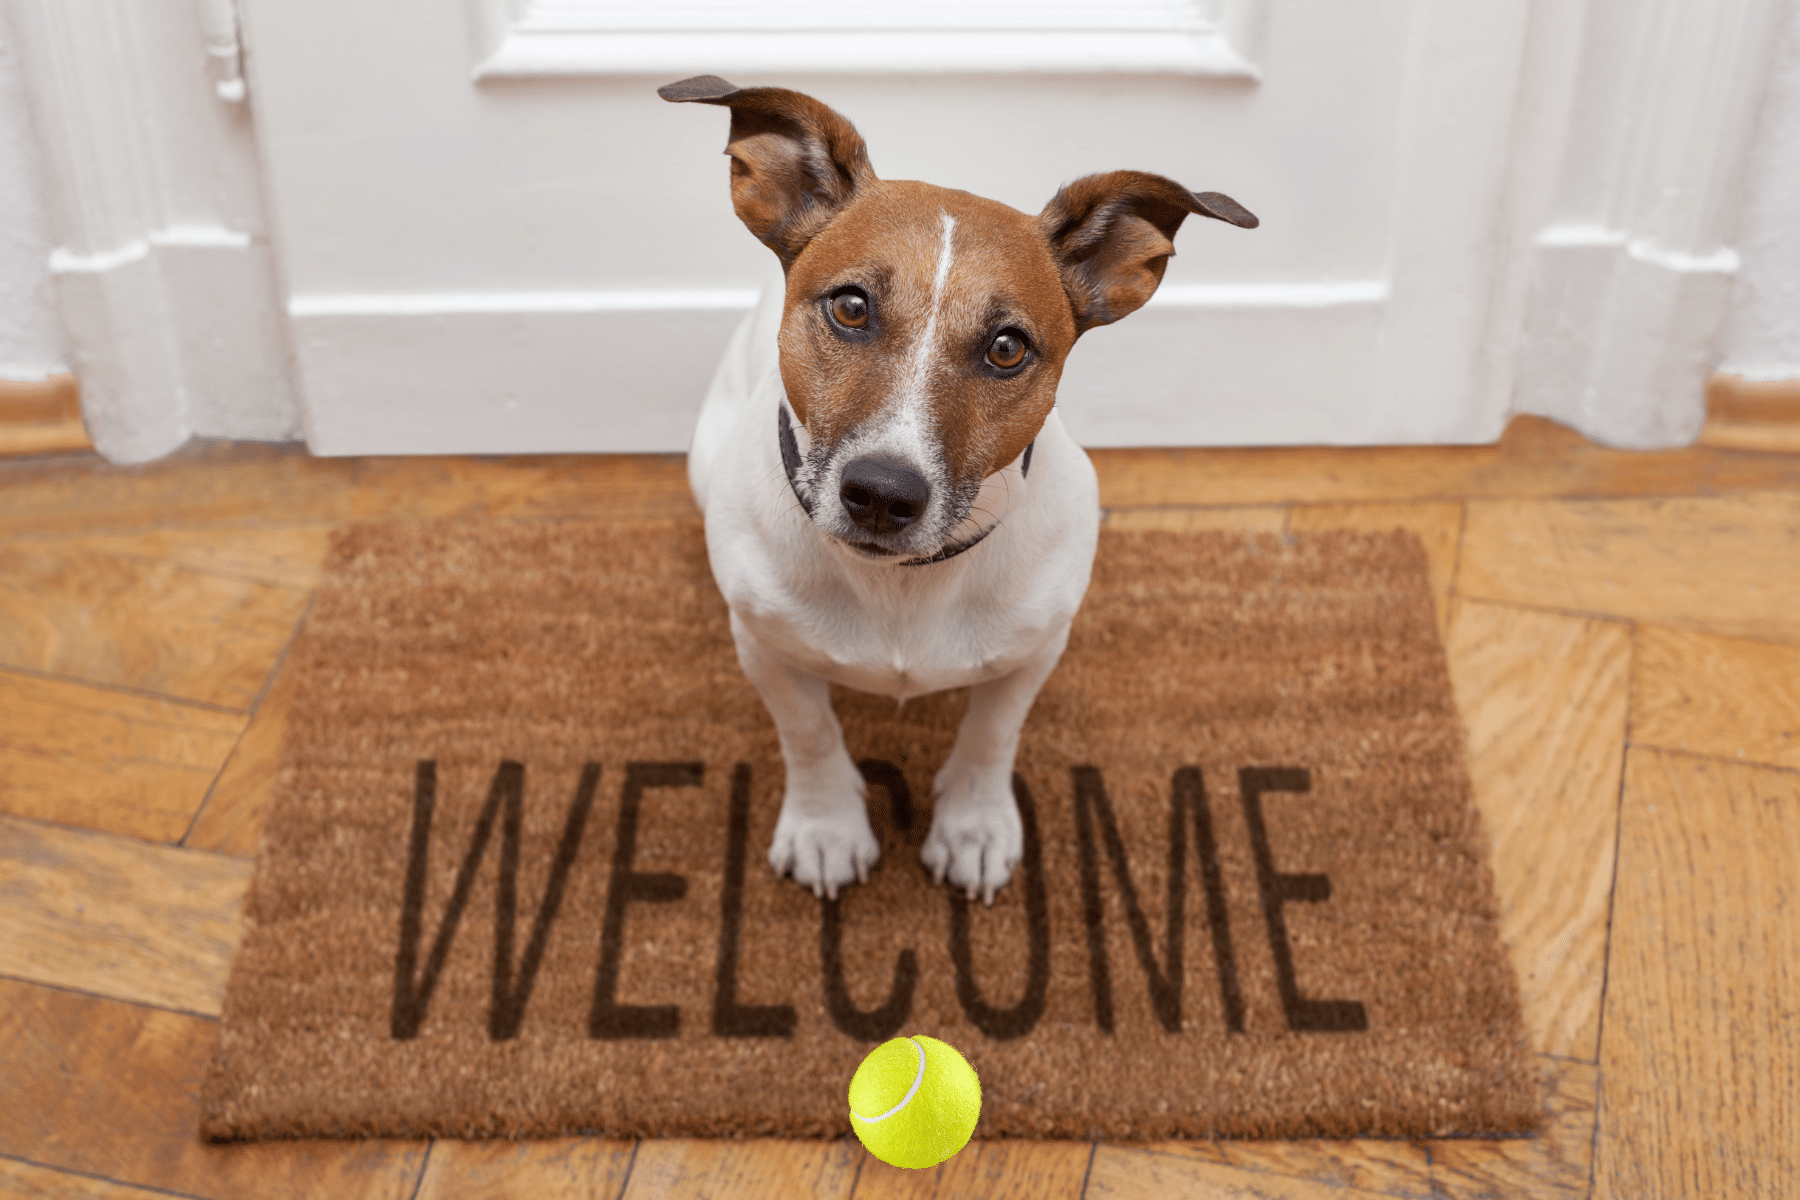 Dog Themed Home Decor Products door mats